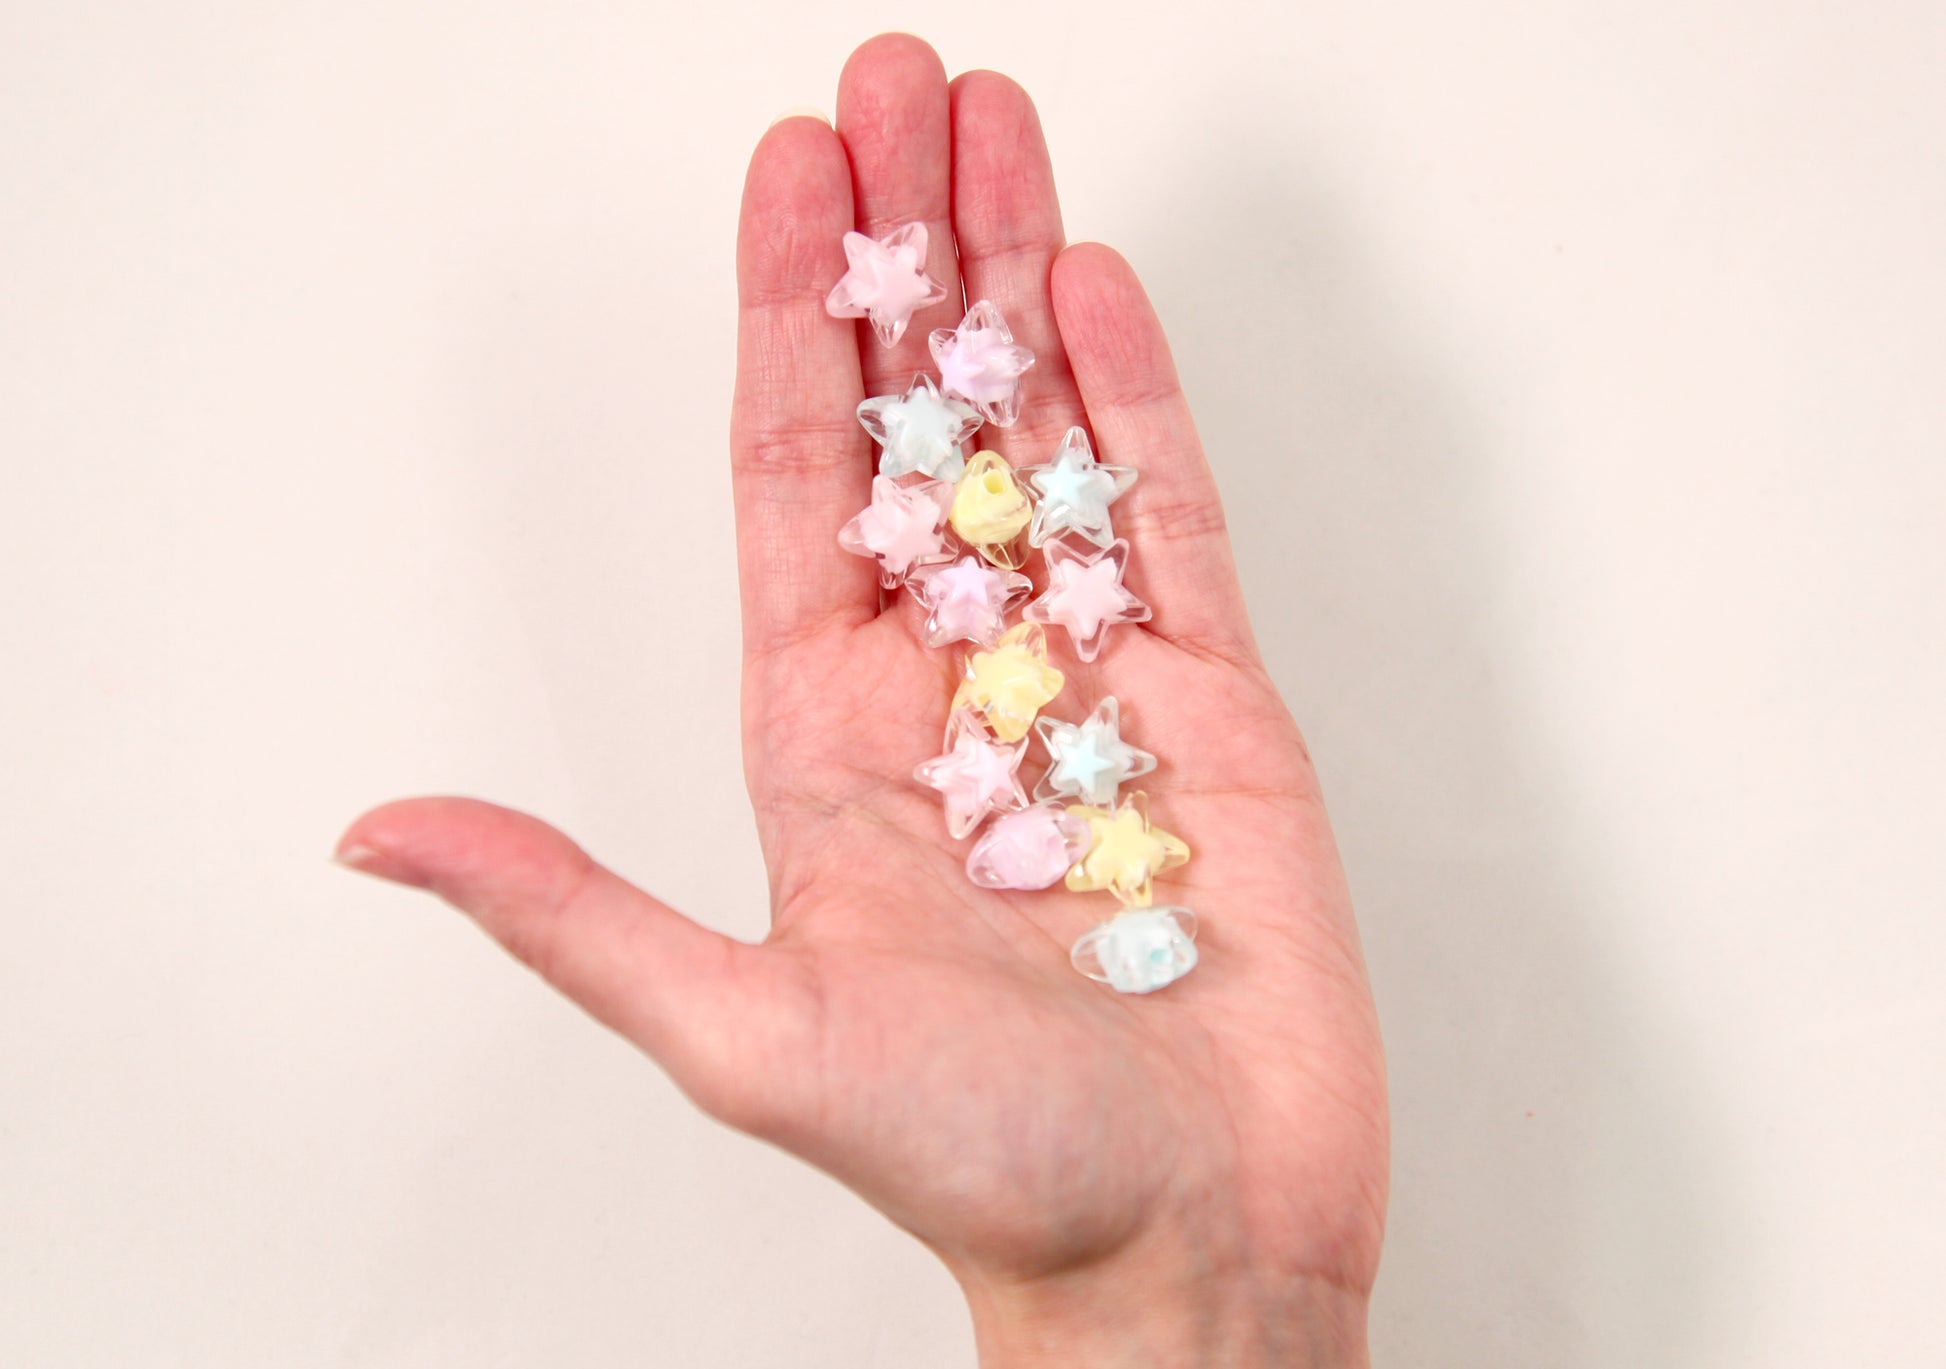 Pastel Star Beads 20mm Bright Pastel Clear Shooting Star Resin or Acrylic  Beads 20 Pc Set 